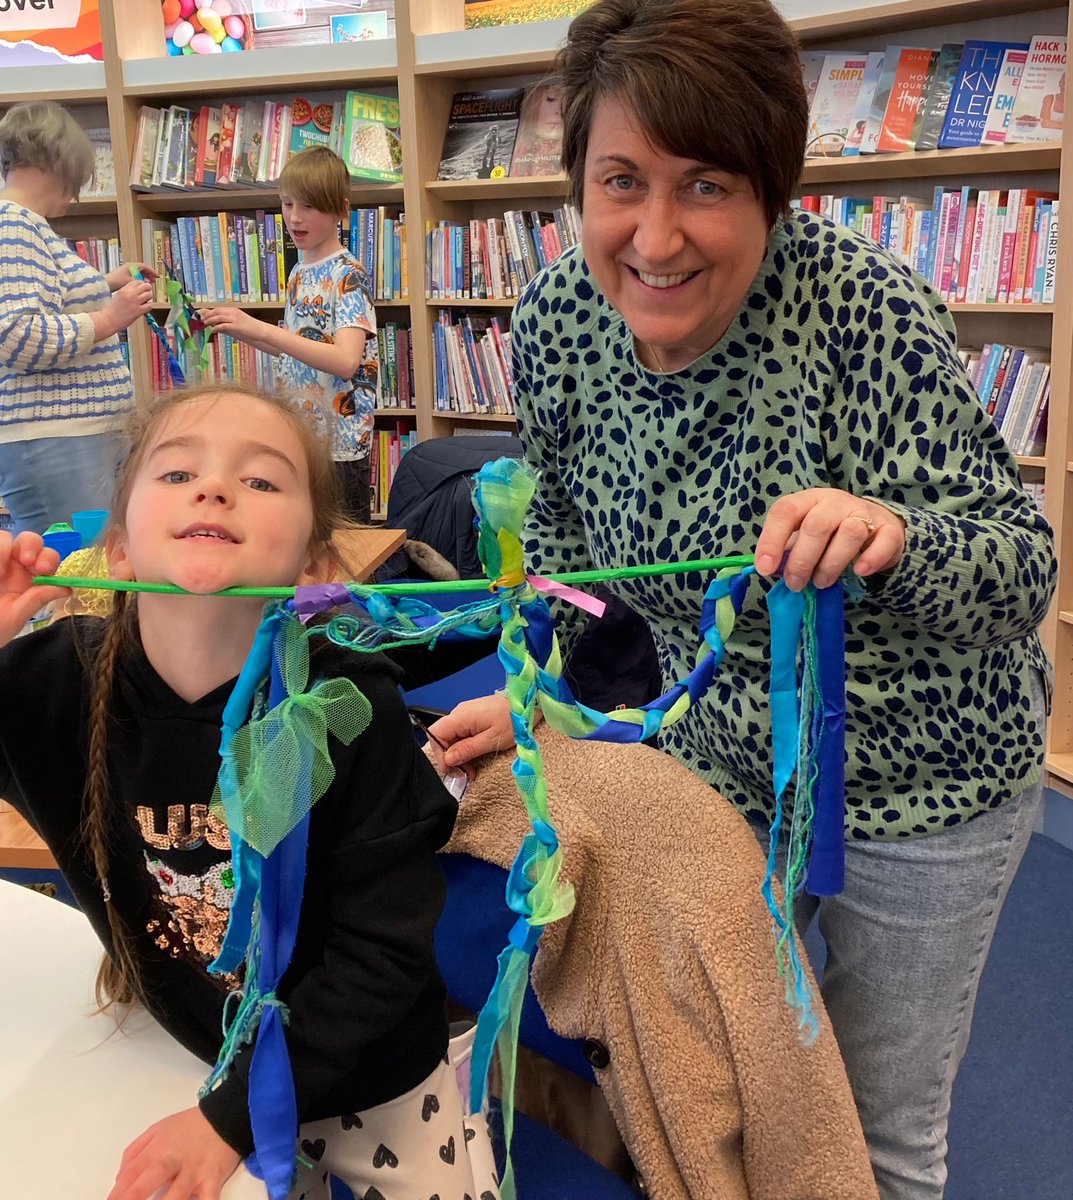 🍃 Have you taken part in any of our ROOTS workshops? Make sure you join us to carry your artwork in the main ROOTS Rotherham Street Carnival Parade on Saturday! 12:30pm, Saturday, Rotherham Minster. We hope to see you there! It's sure to be a fun event for all the family!